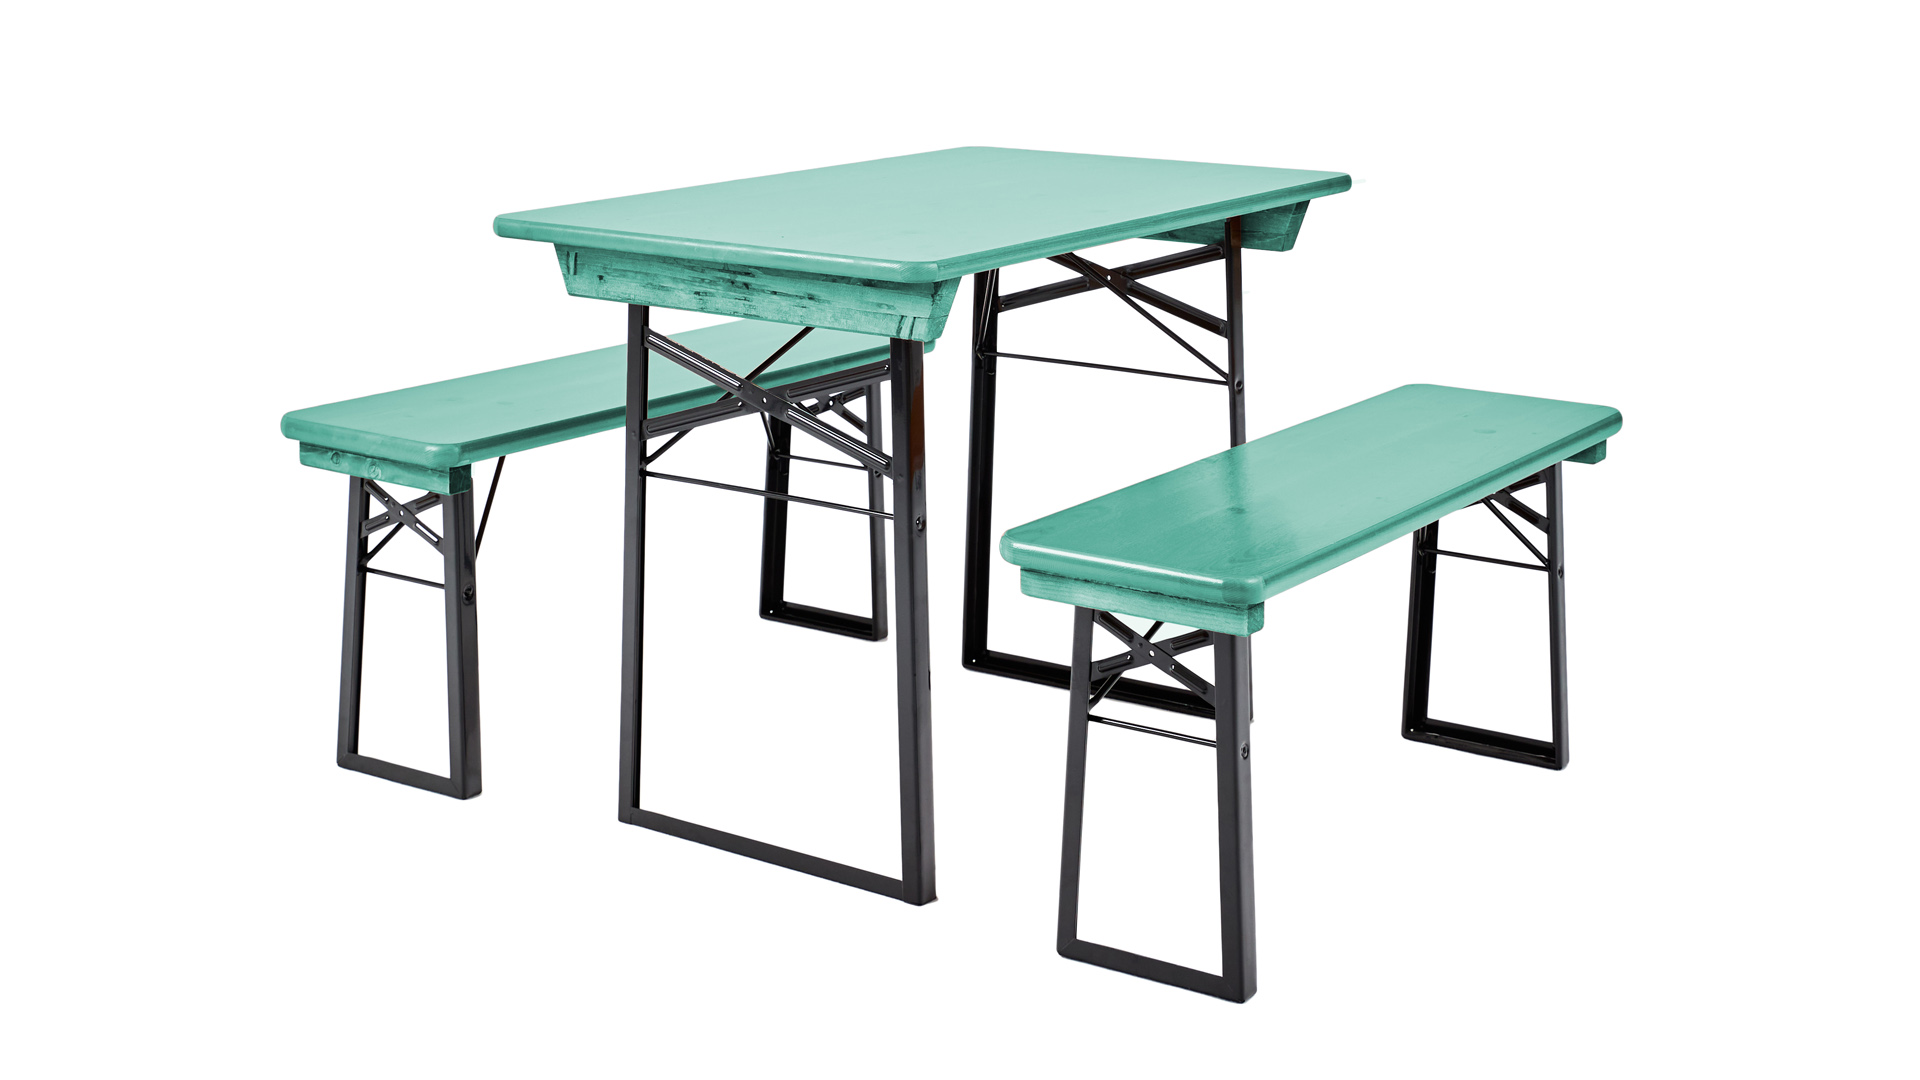 The small beer garden table set Shorty in the colour mint green.